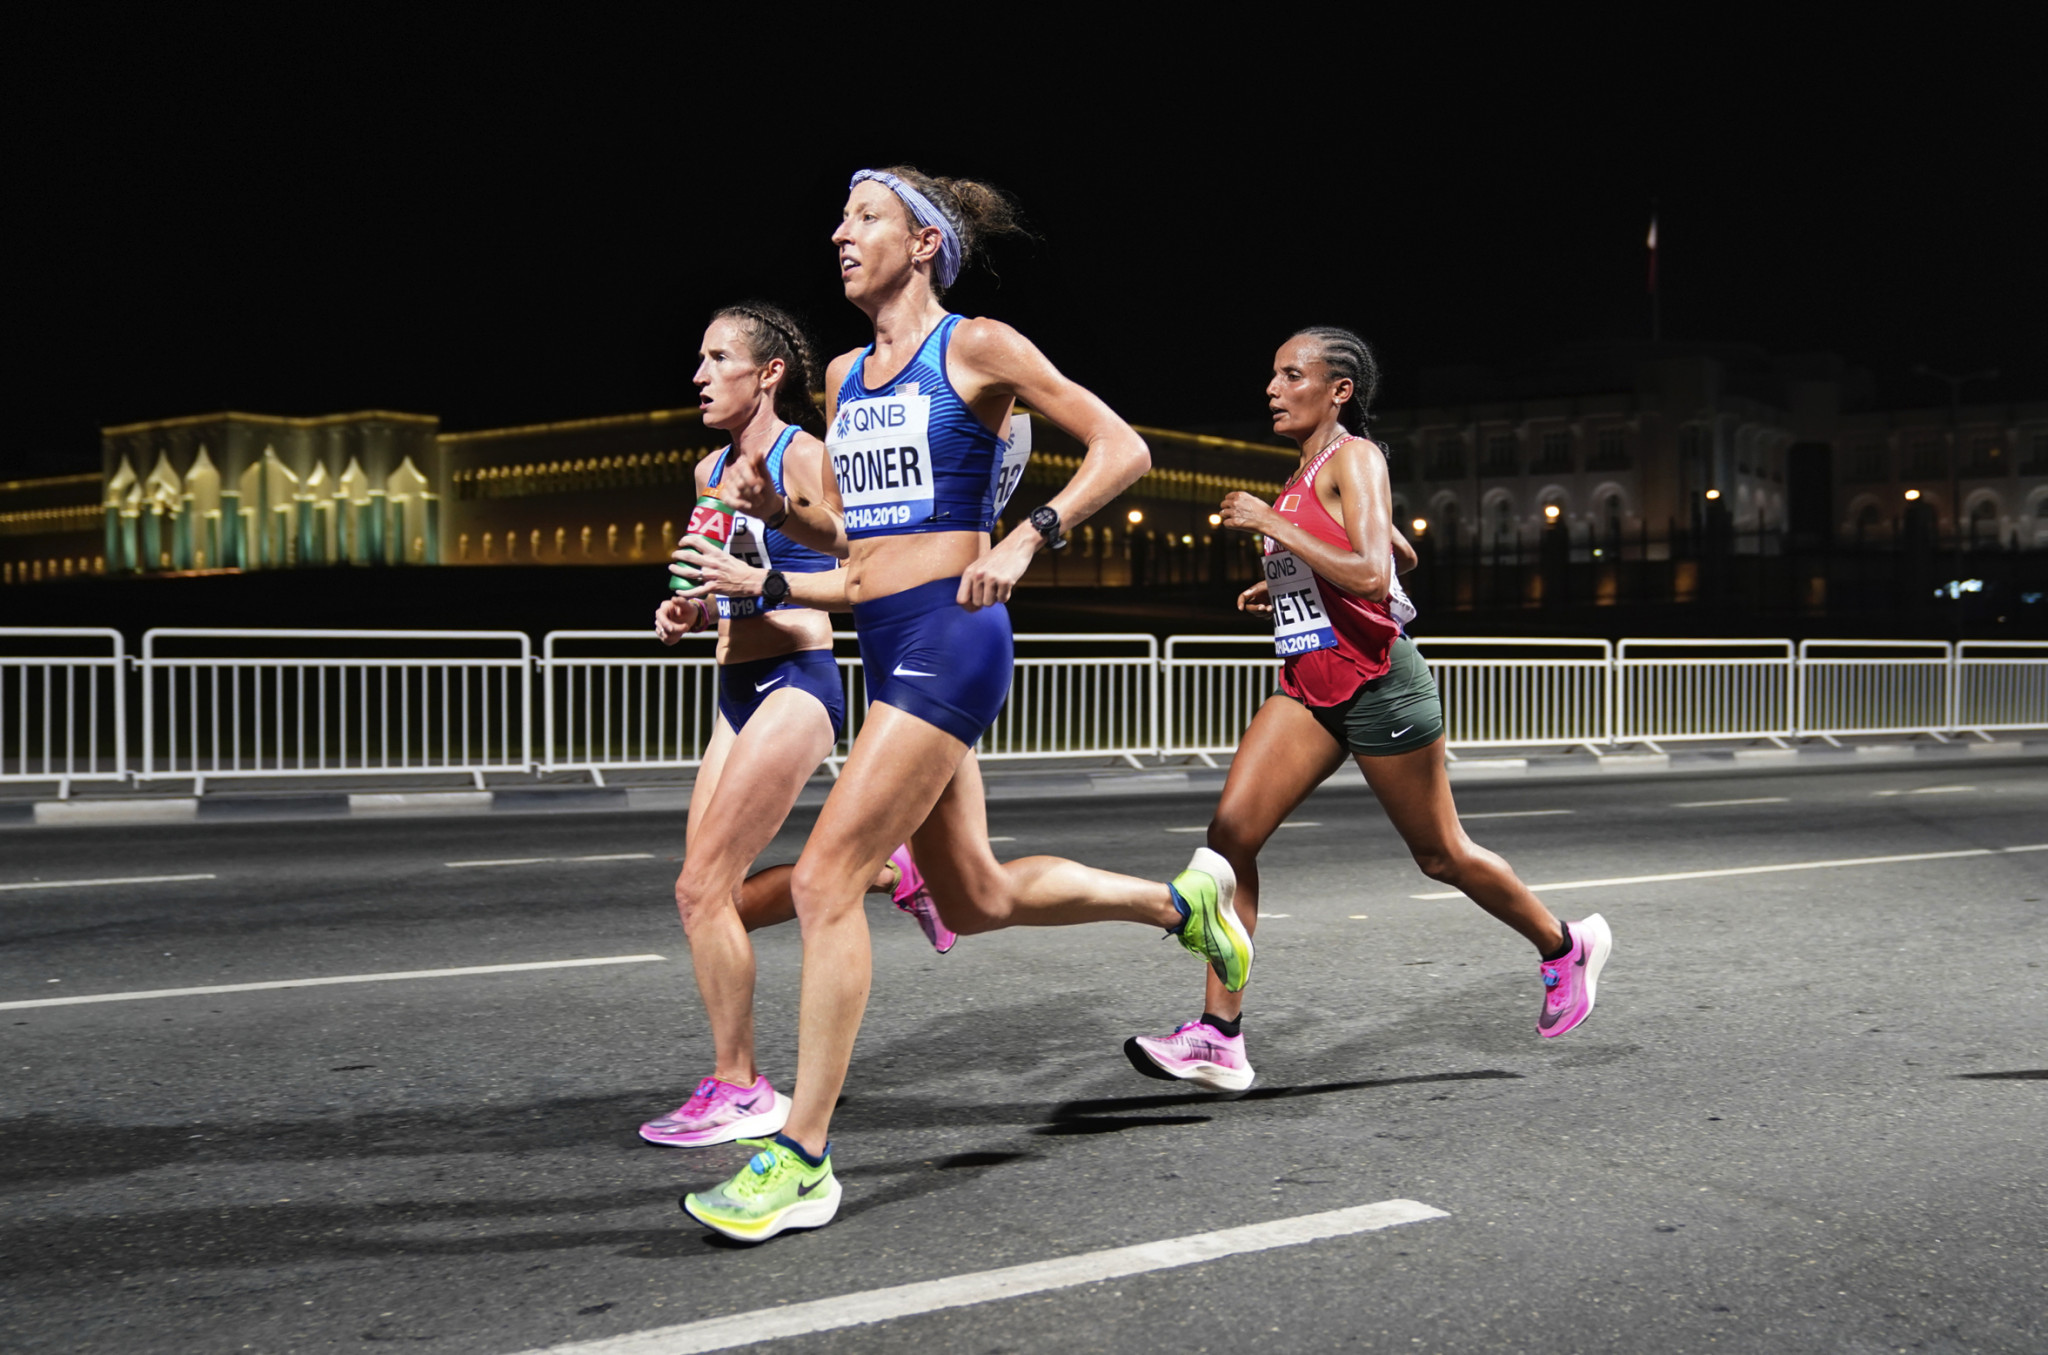 Of the 68 starters in the women's marathon run at midnight at last year's Doha World Championships, 28 failed to finish - but that may not have been solely down to conditions ©Getty Images